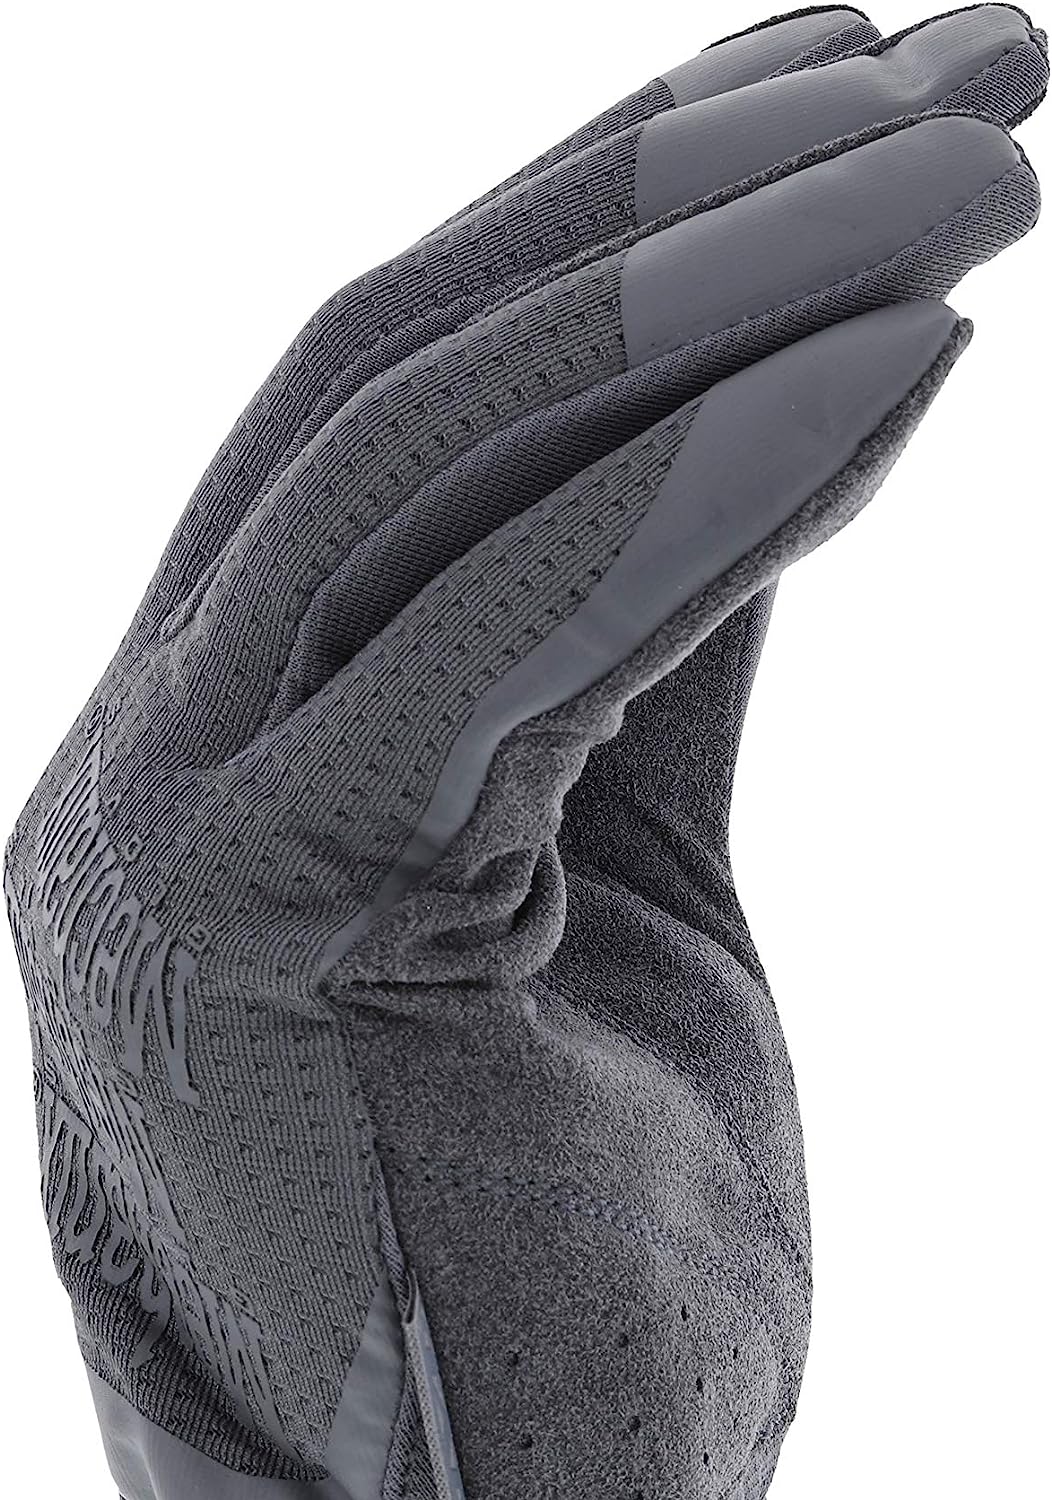 FastFit Tactical Gloves - Elastic Cuff, Flexible Grip, Touchscreen Capable